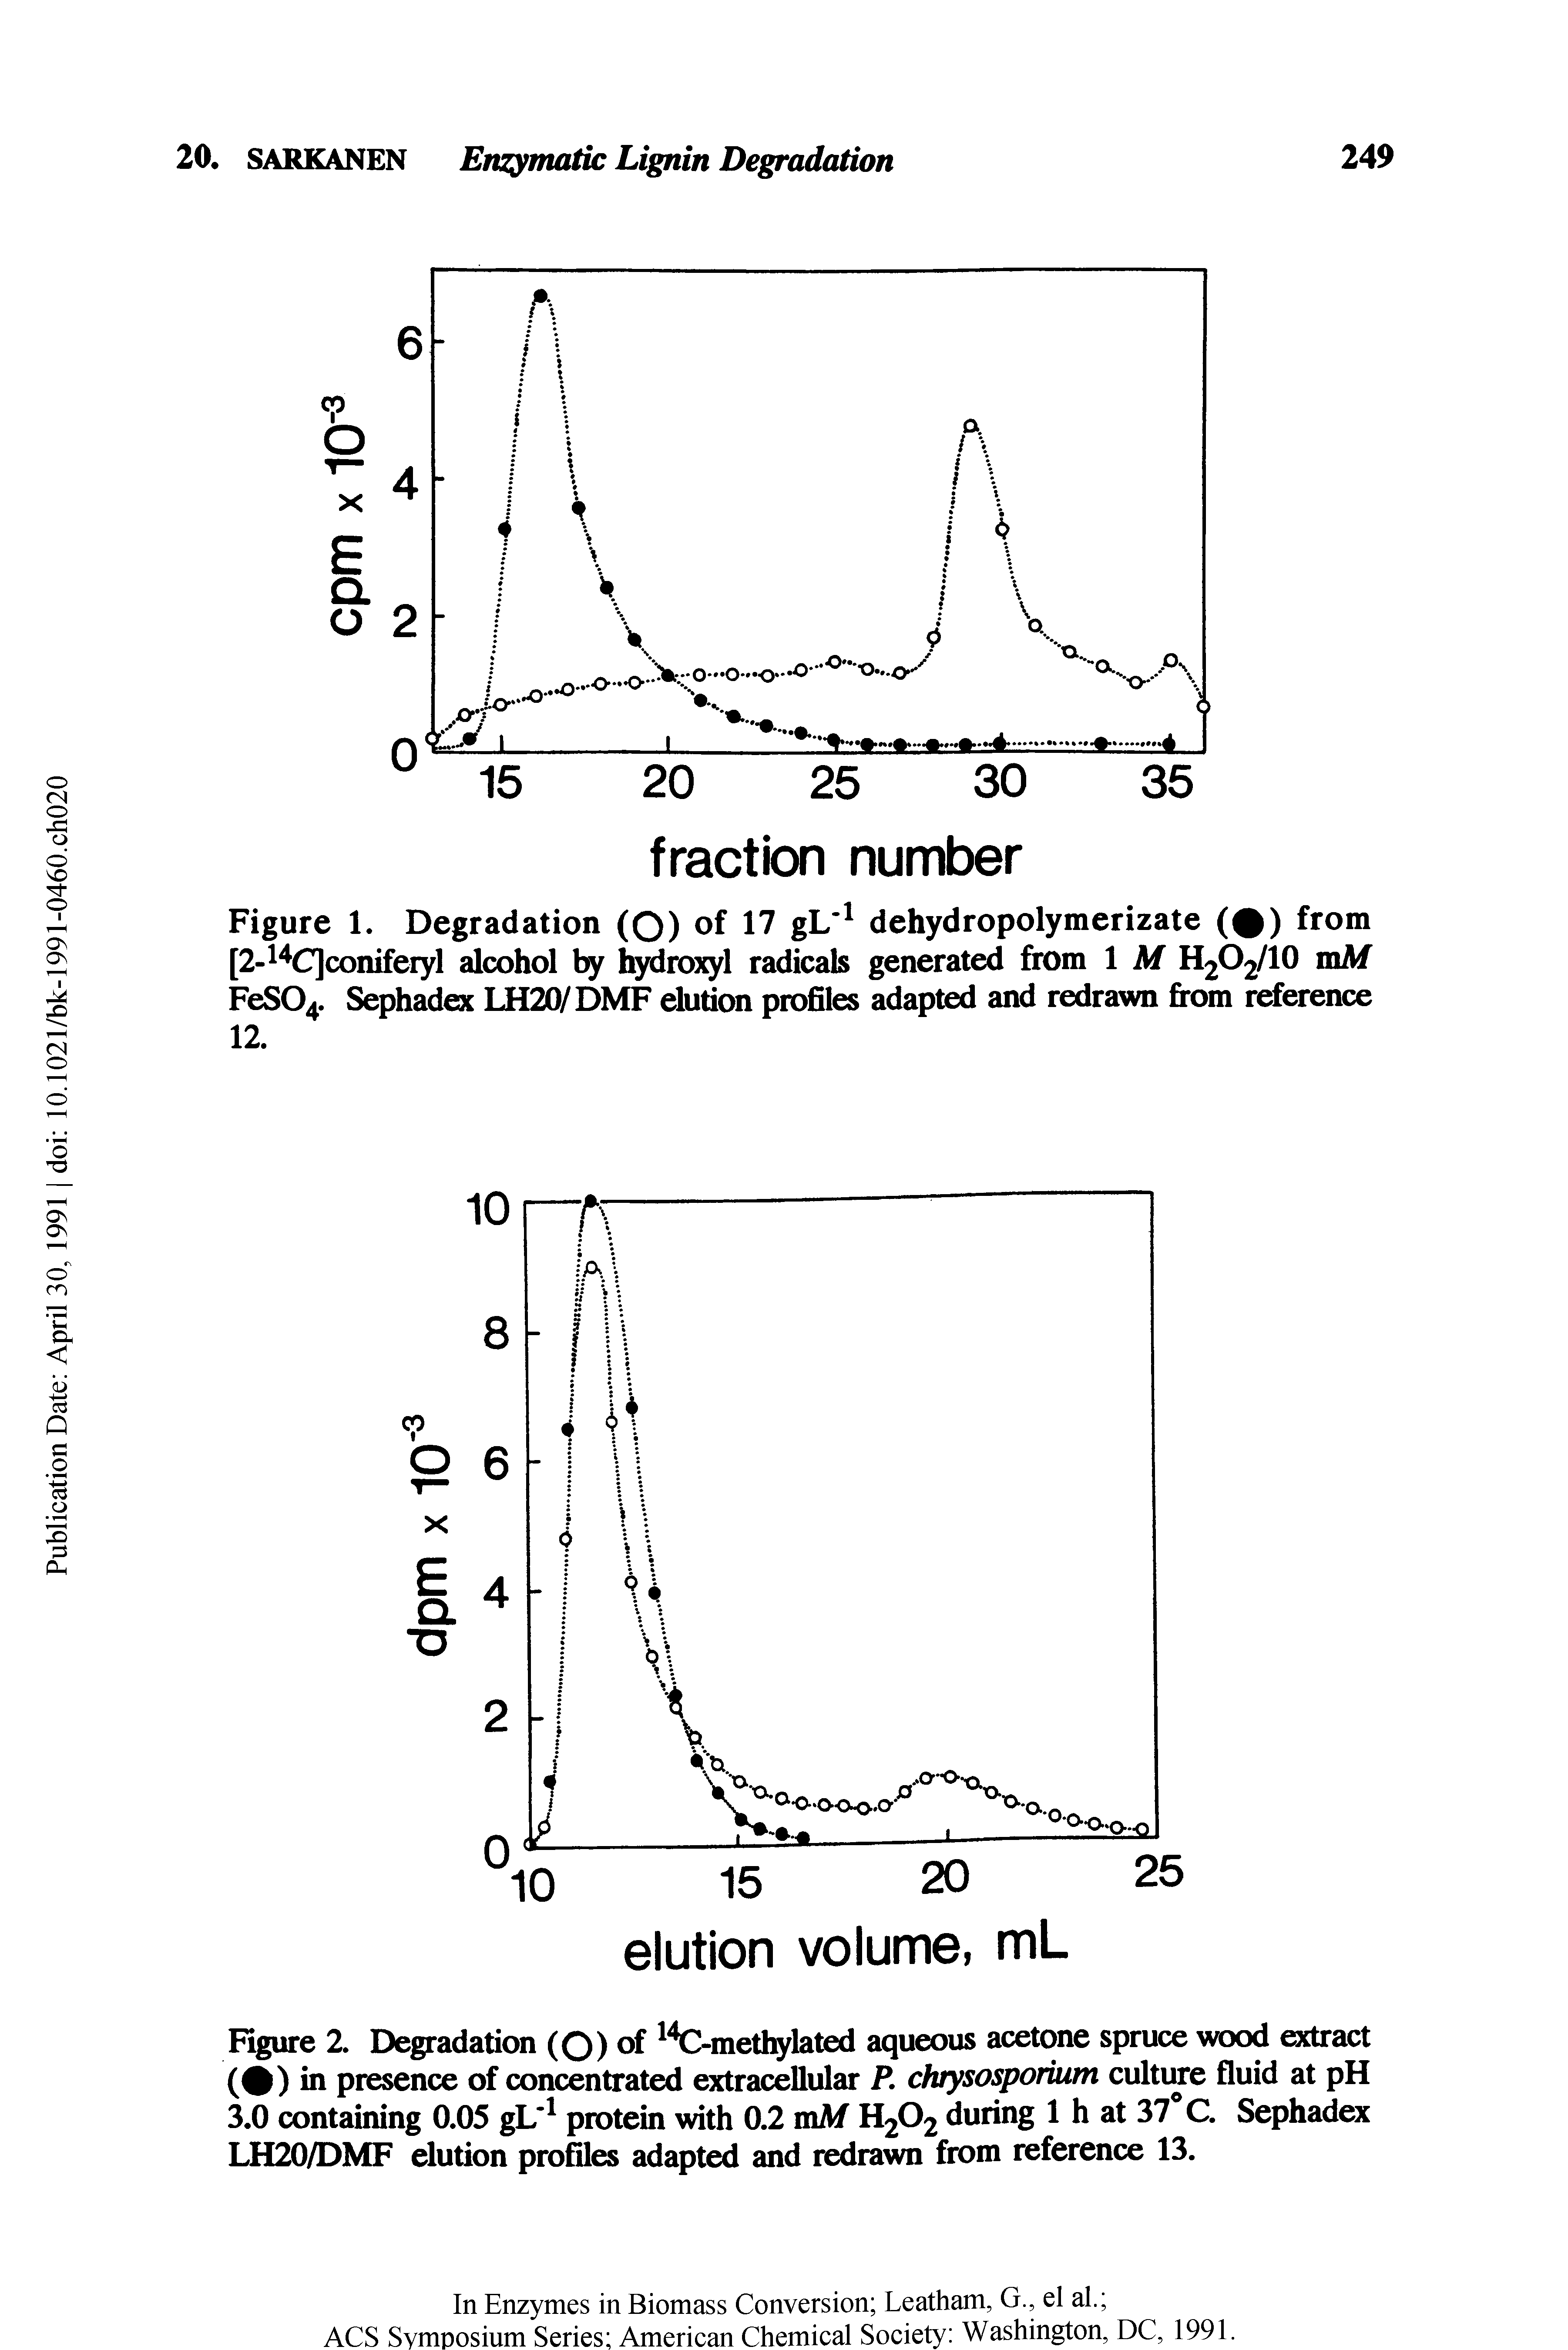 Figure 2. Degradation (O) of -metltylated aqueous acetone spruce wood extract ( ) in presence of concentrated extracellular P, chrysosporium culture fluid at pH 3.0 containing 0.05 gL protein with 0.2 mM H2O2 during 1 h at 37 C. Sephadex LH20/DMF elution profiles adapted and redrawn from reference 13.